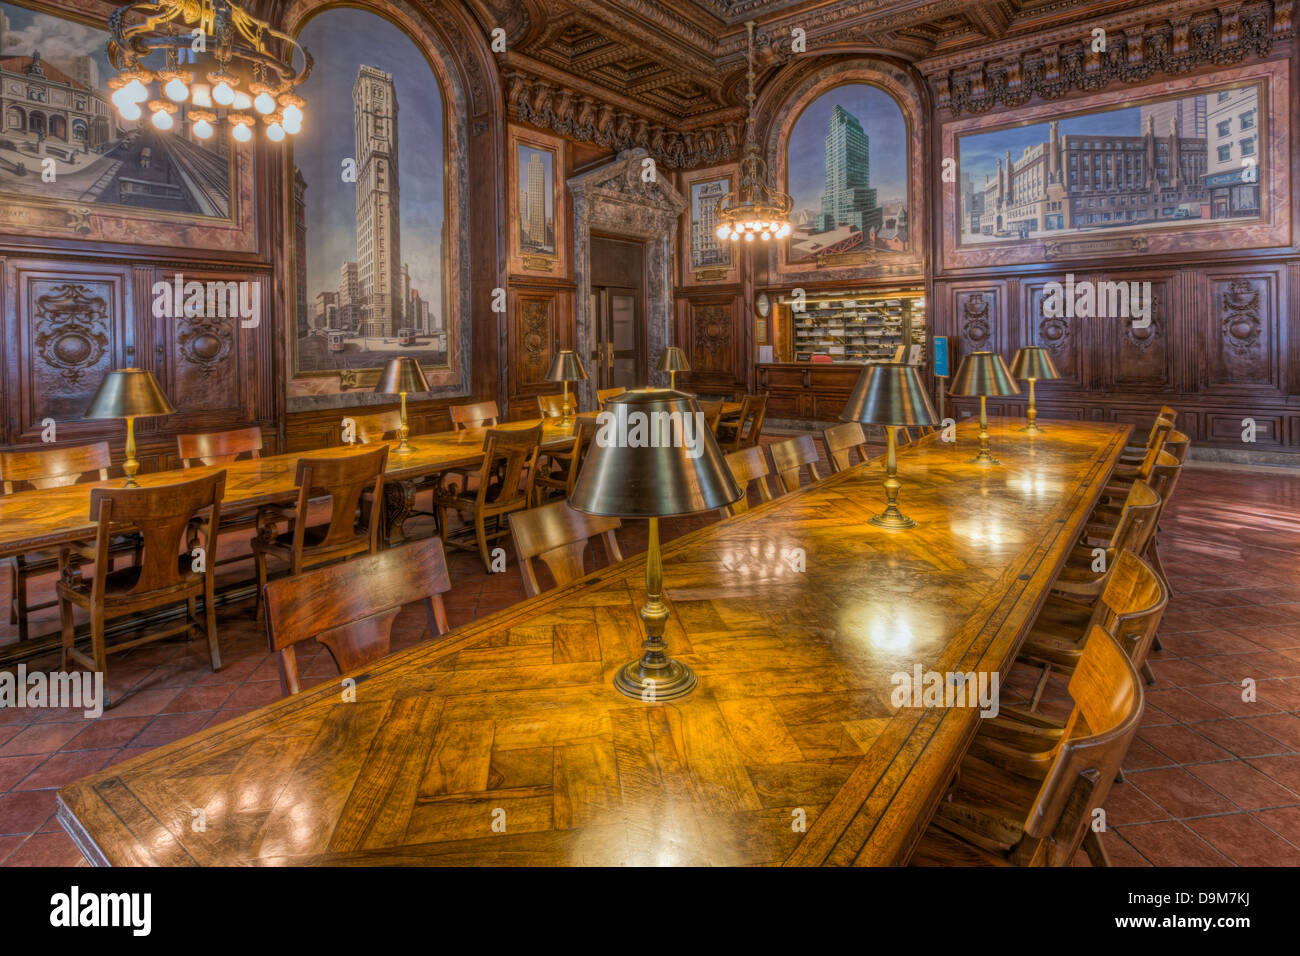 Wood paneling and murals decorate the New York Public Library's DeWitt Wallace Periodicals Room. Stock Photo